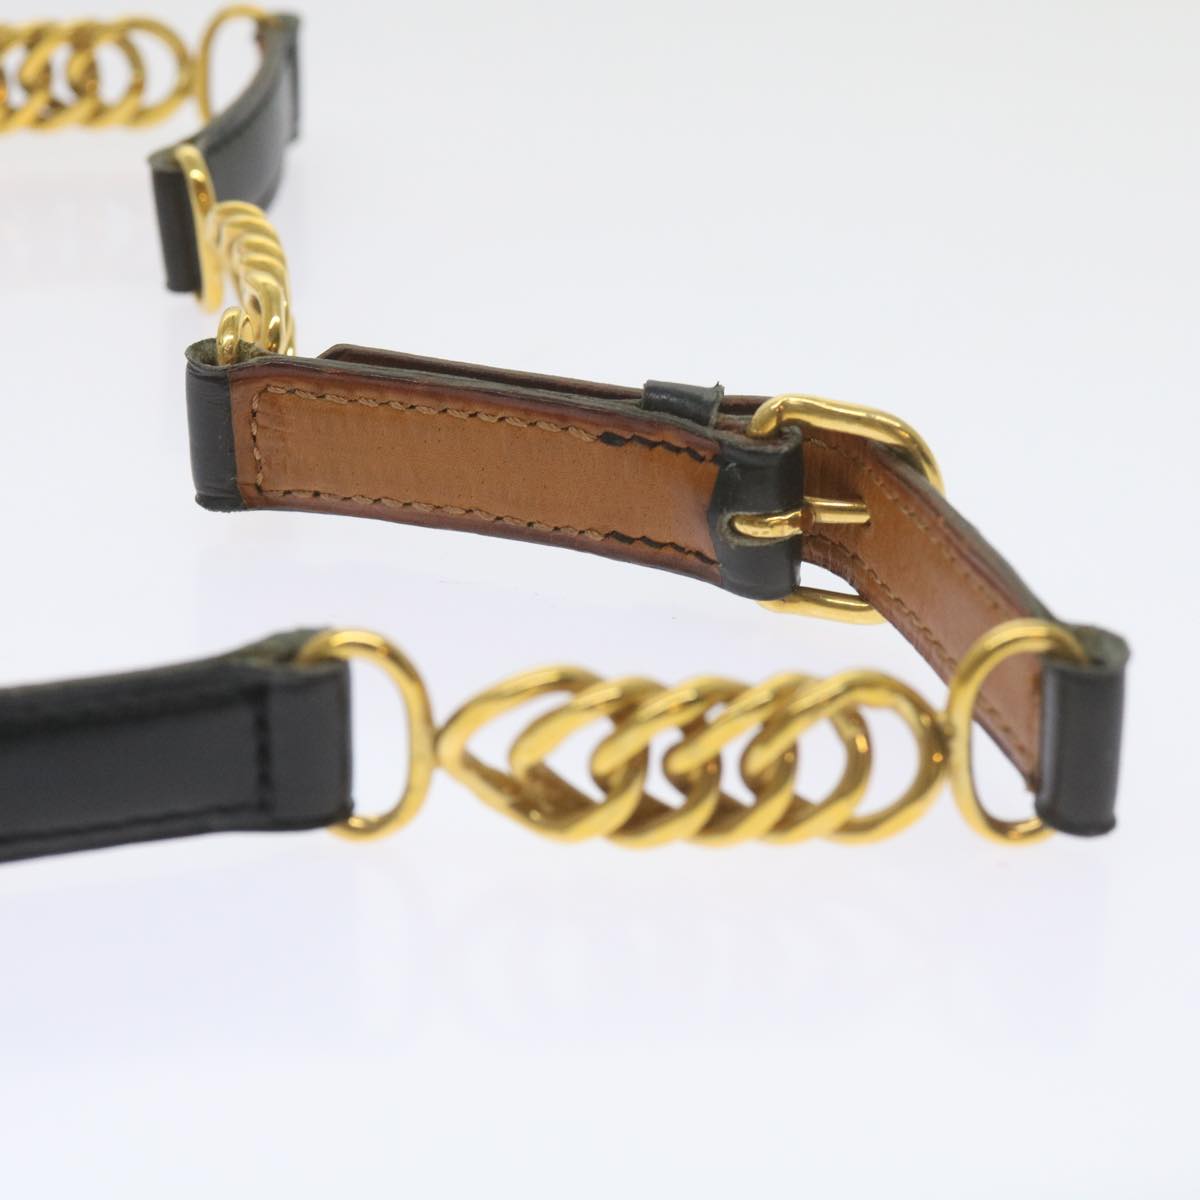 HERMES Chain Belt Leather 28.3""-29.5"" Black Gold Auth ar10901